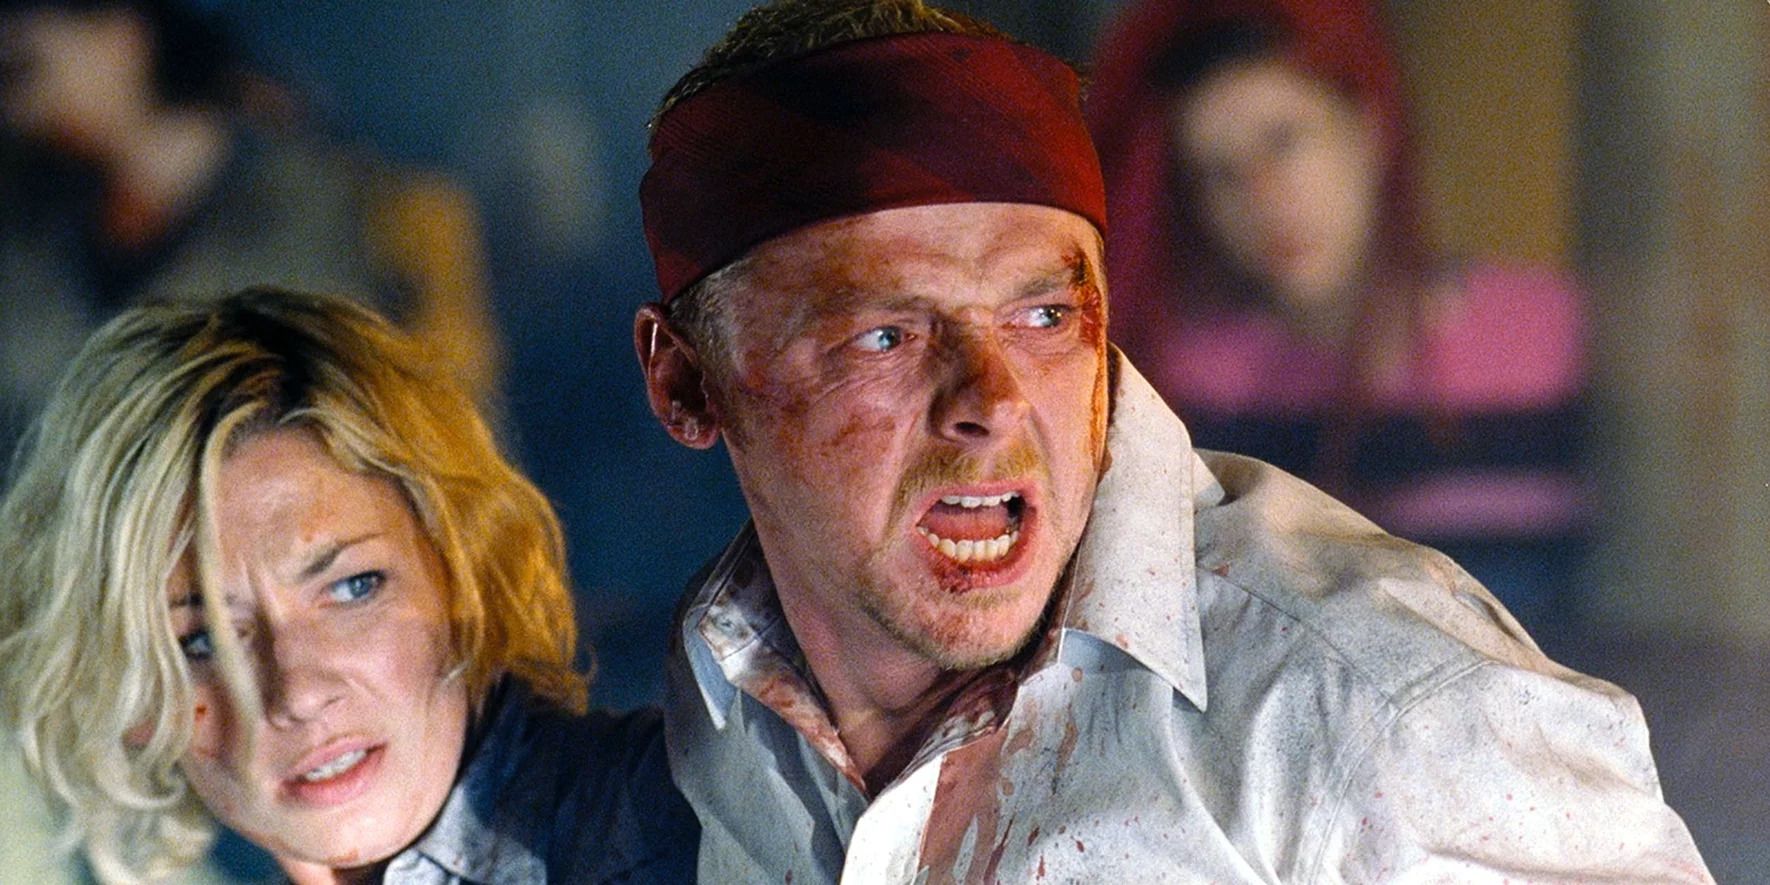 Shaun and Liz fighting off the zombies in Shaun of the Dead